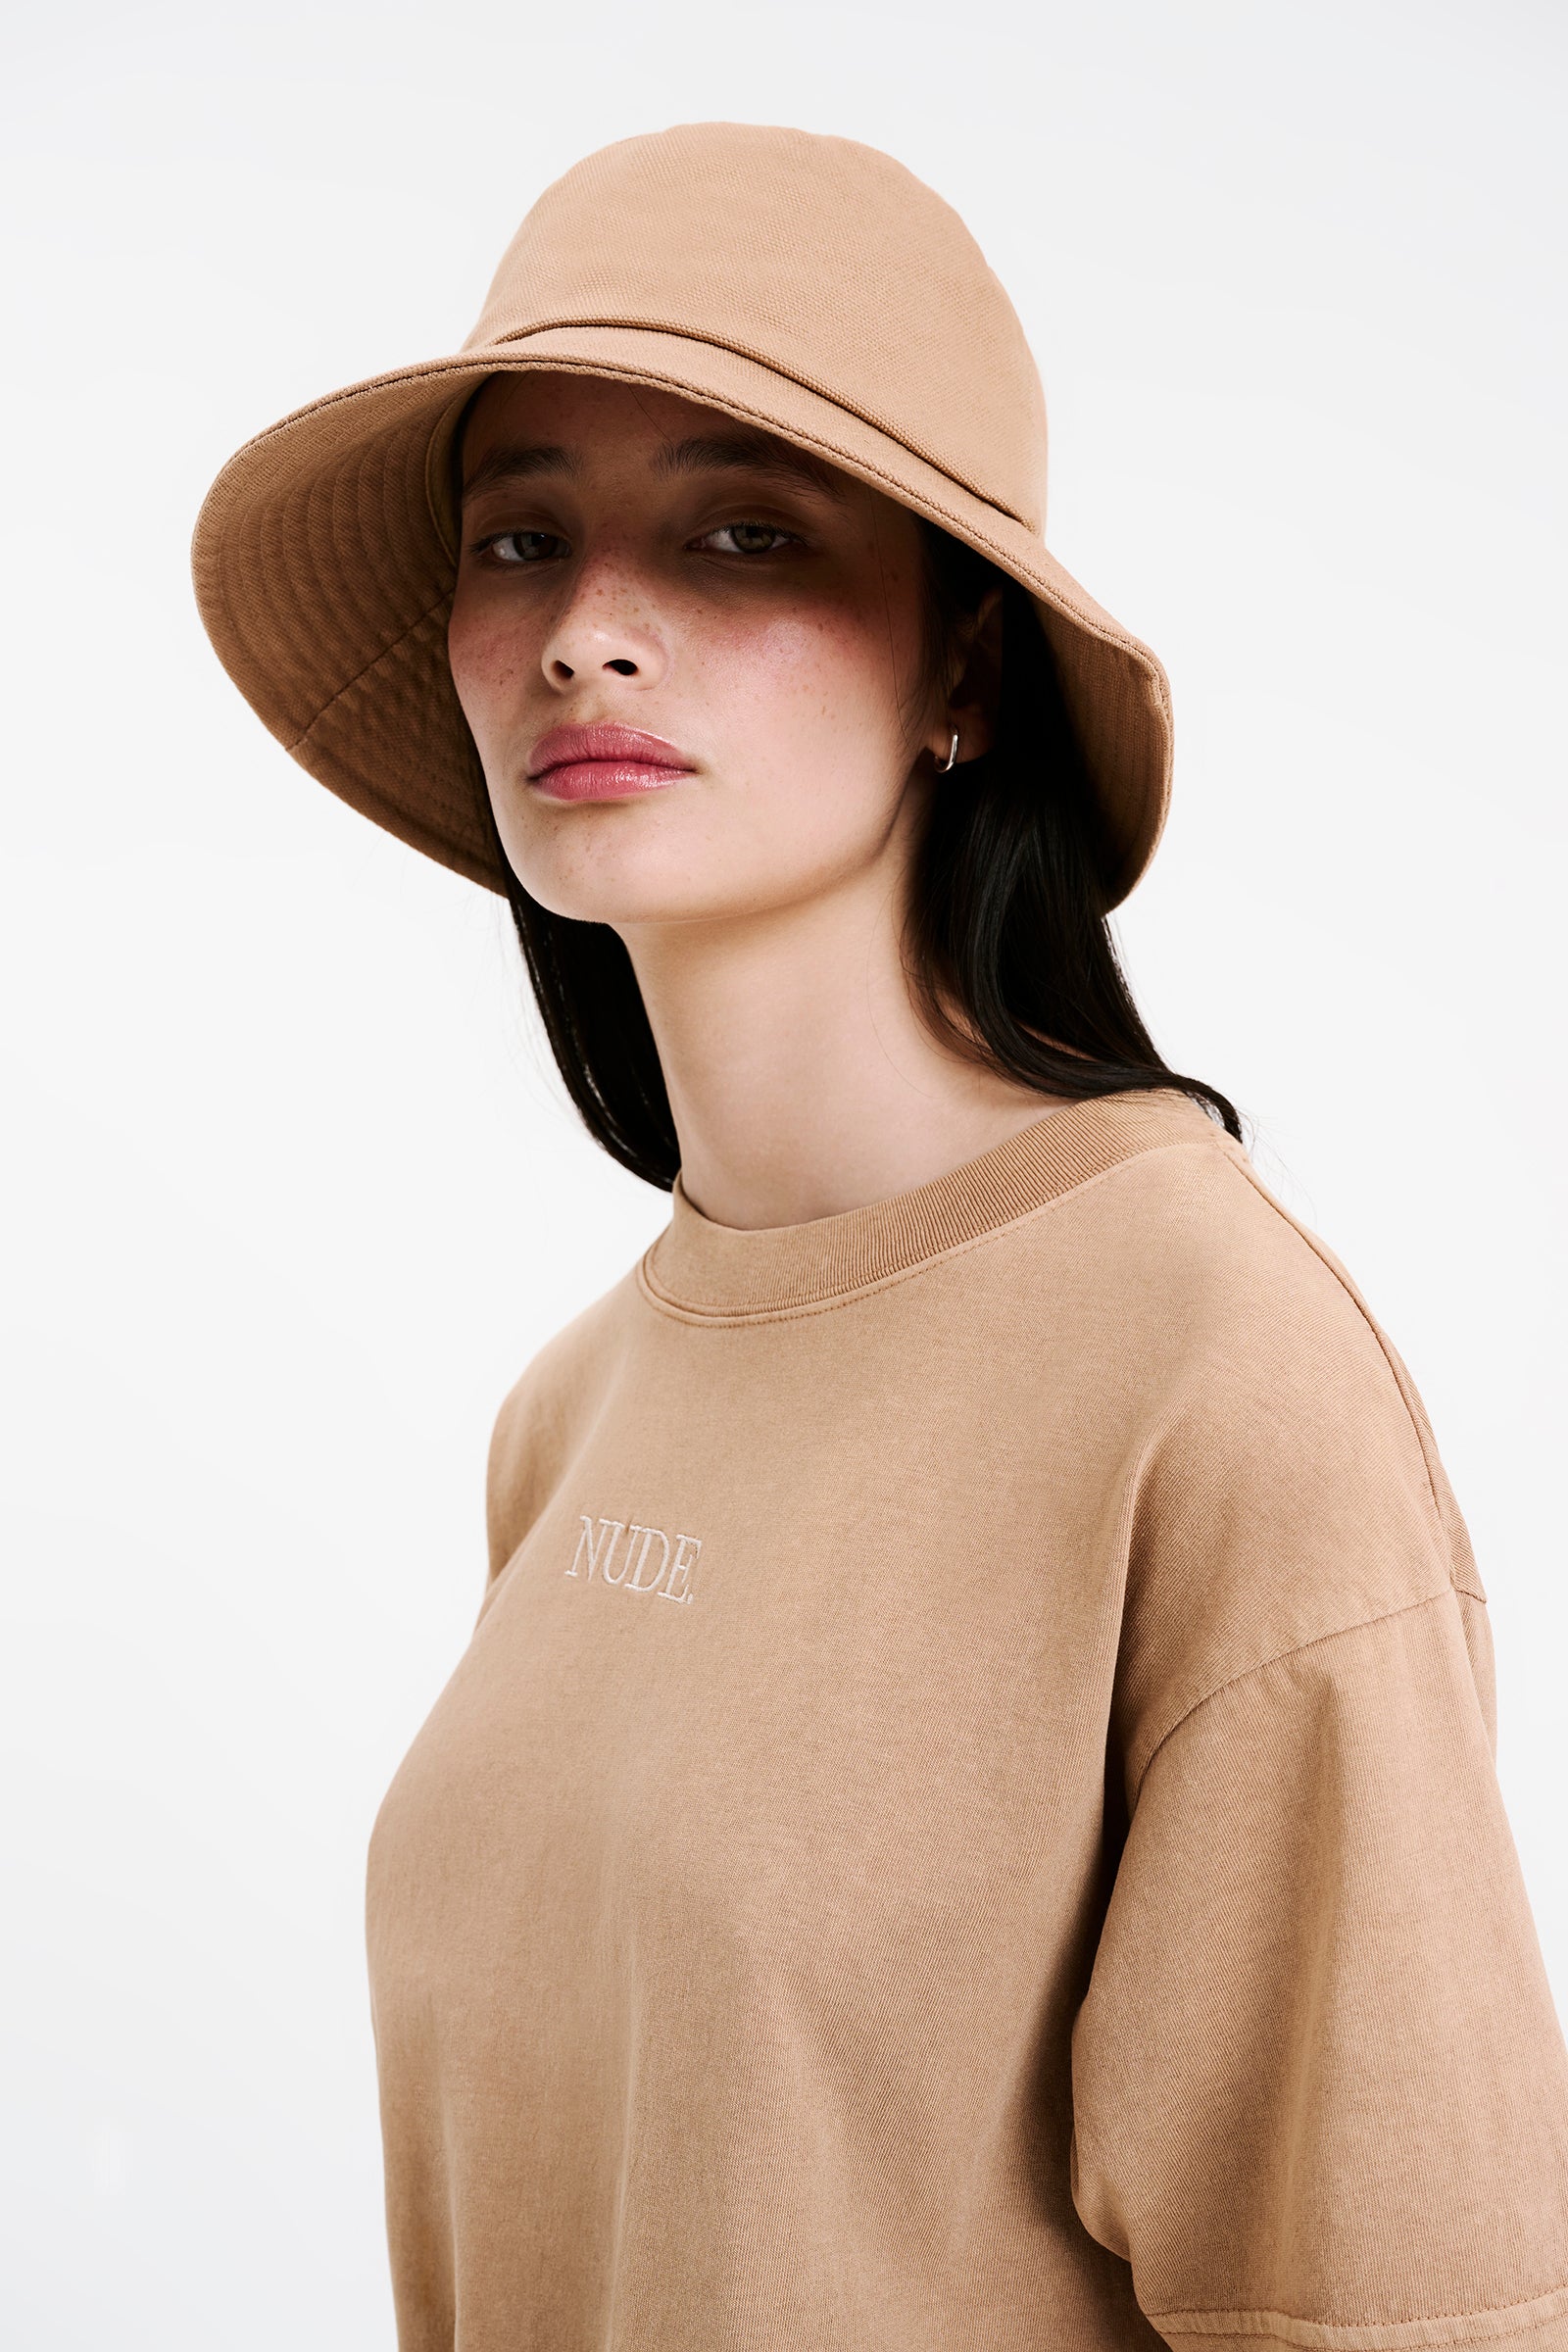 Nude Lucy Canvas Bucket Hat In a Brown Sesame Colour